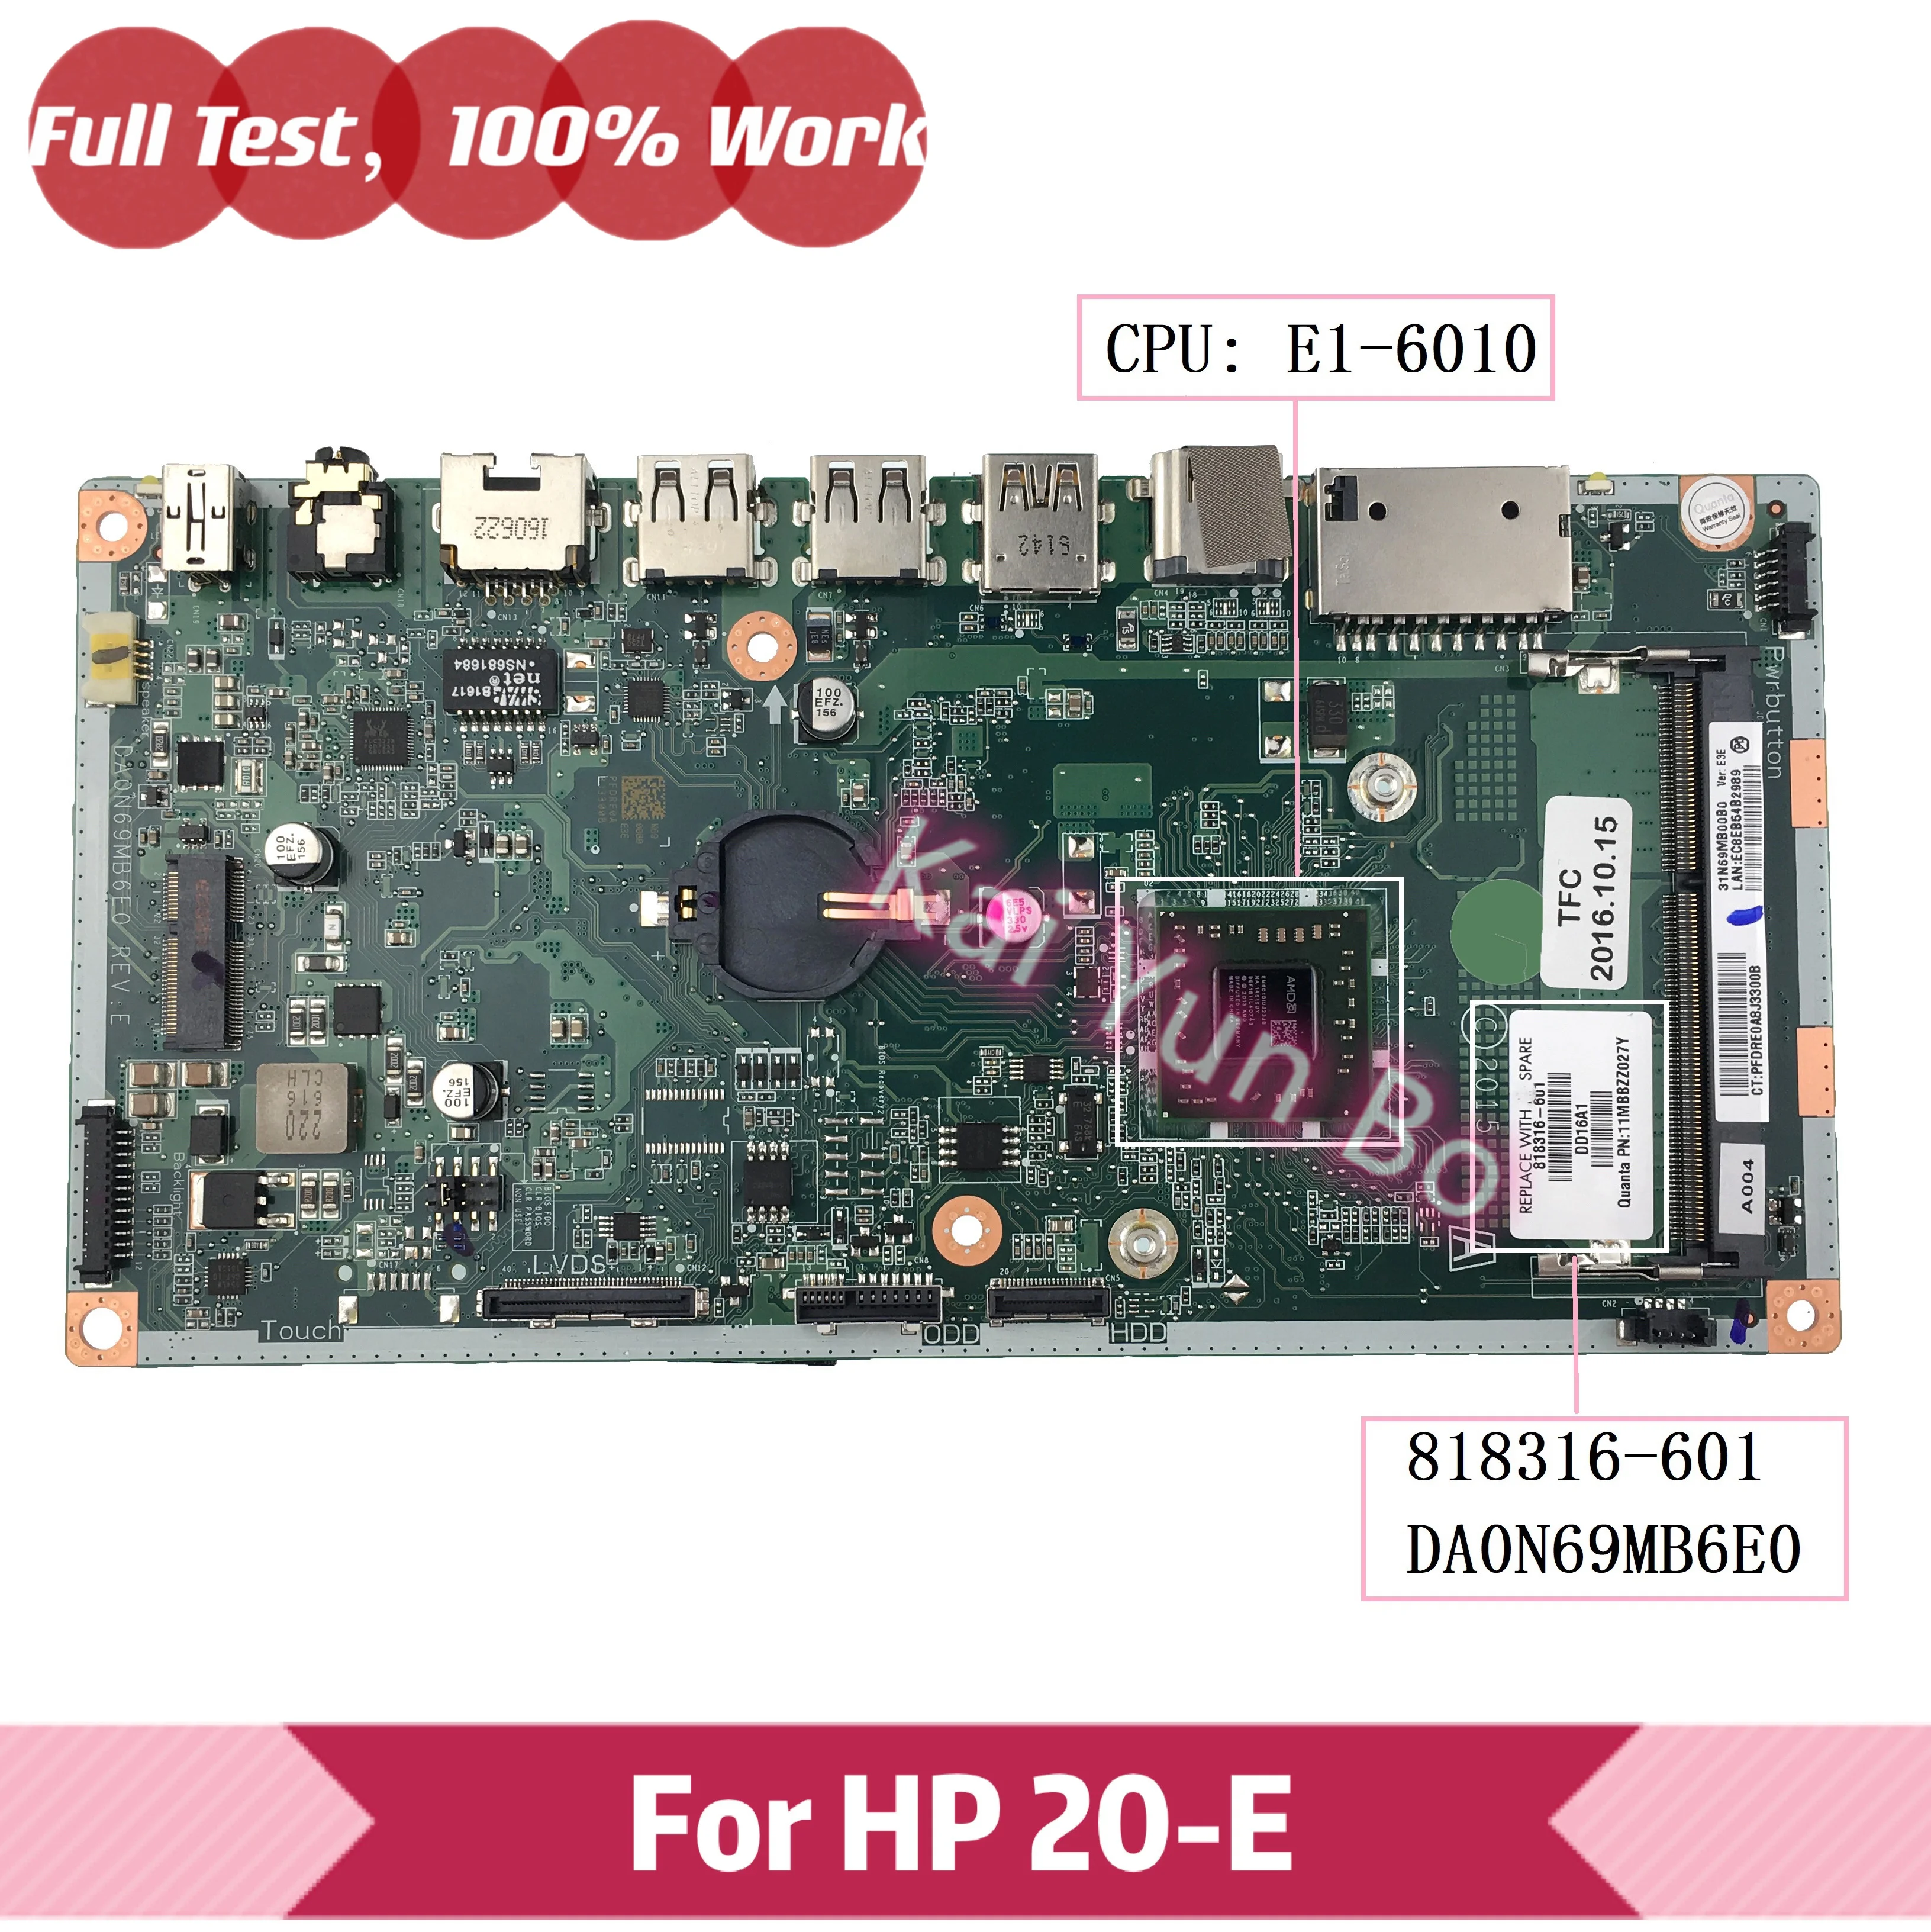 

818316-601 For HP 20-E Laptop Motherboard 818316-501 818316-001 DAN69AMB6D0 with E1-6010 CPU DDR3 100% Full Tested